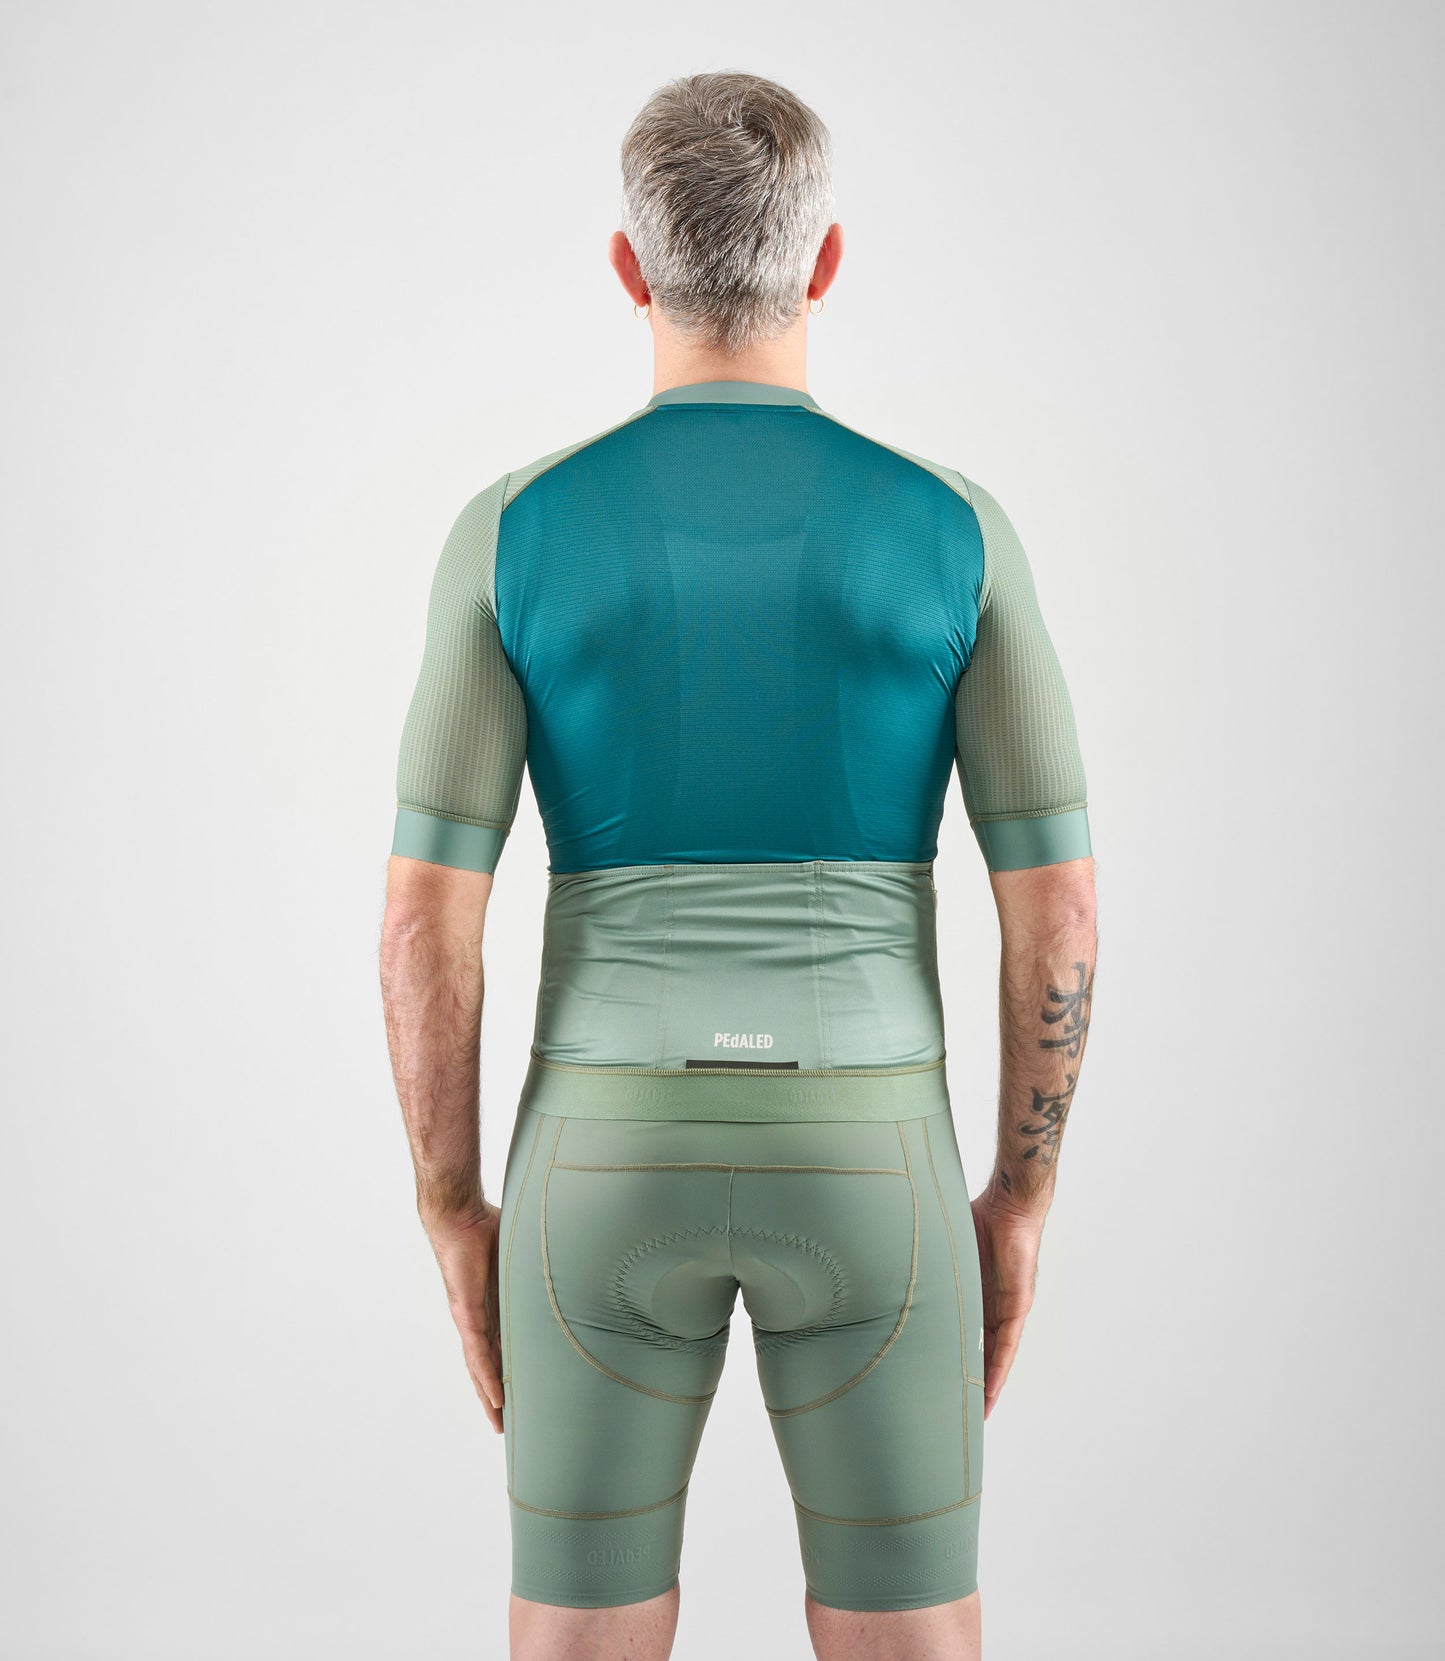 PEDALED Element Jersey (Light Green)